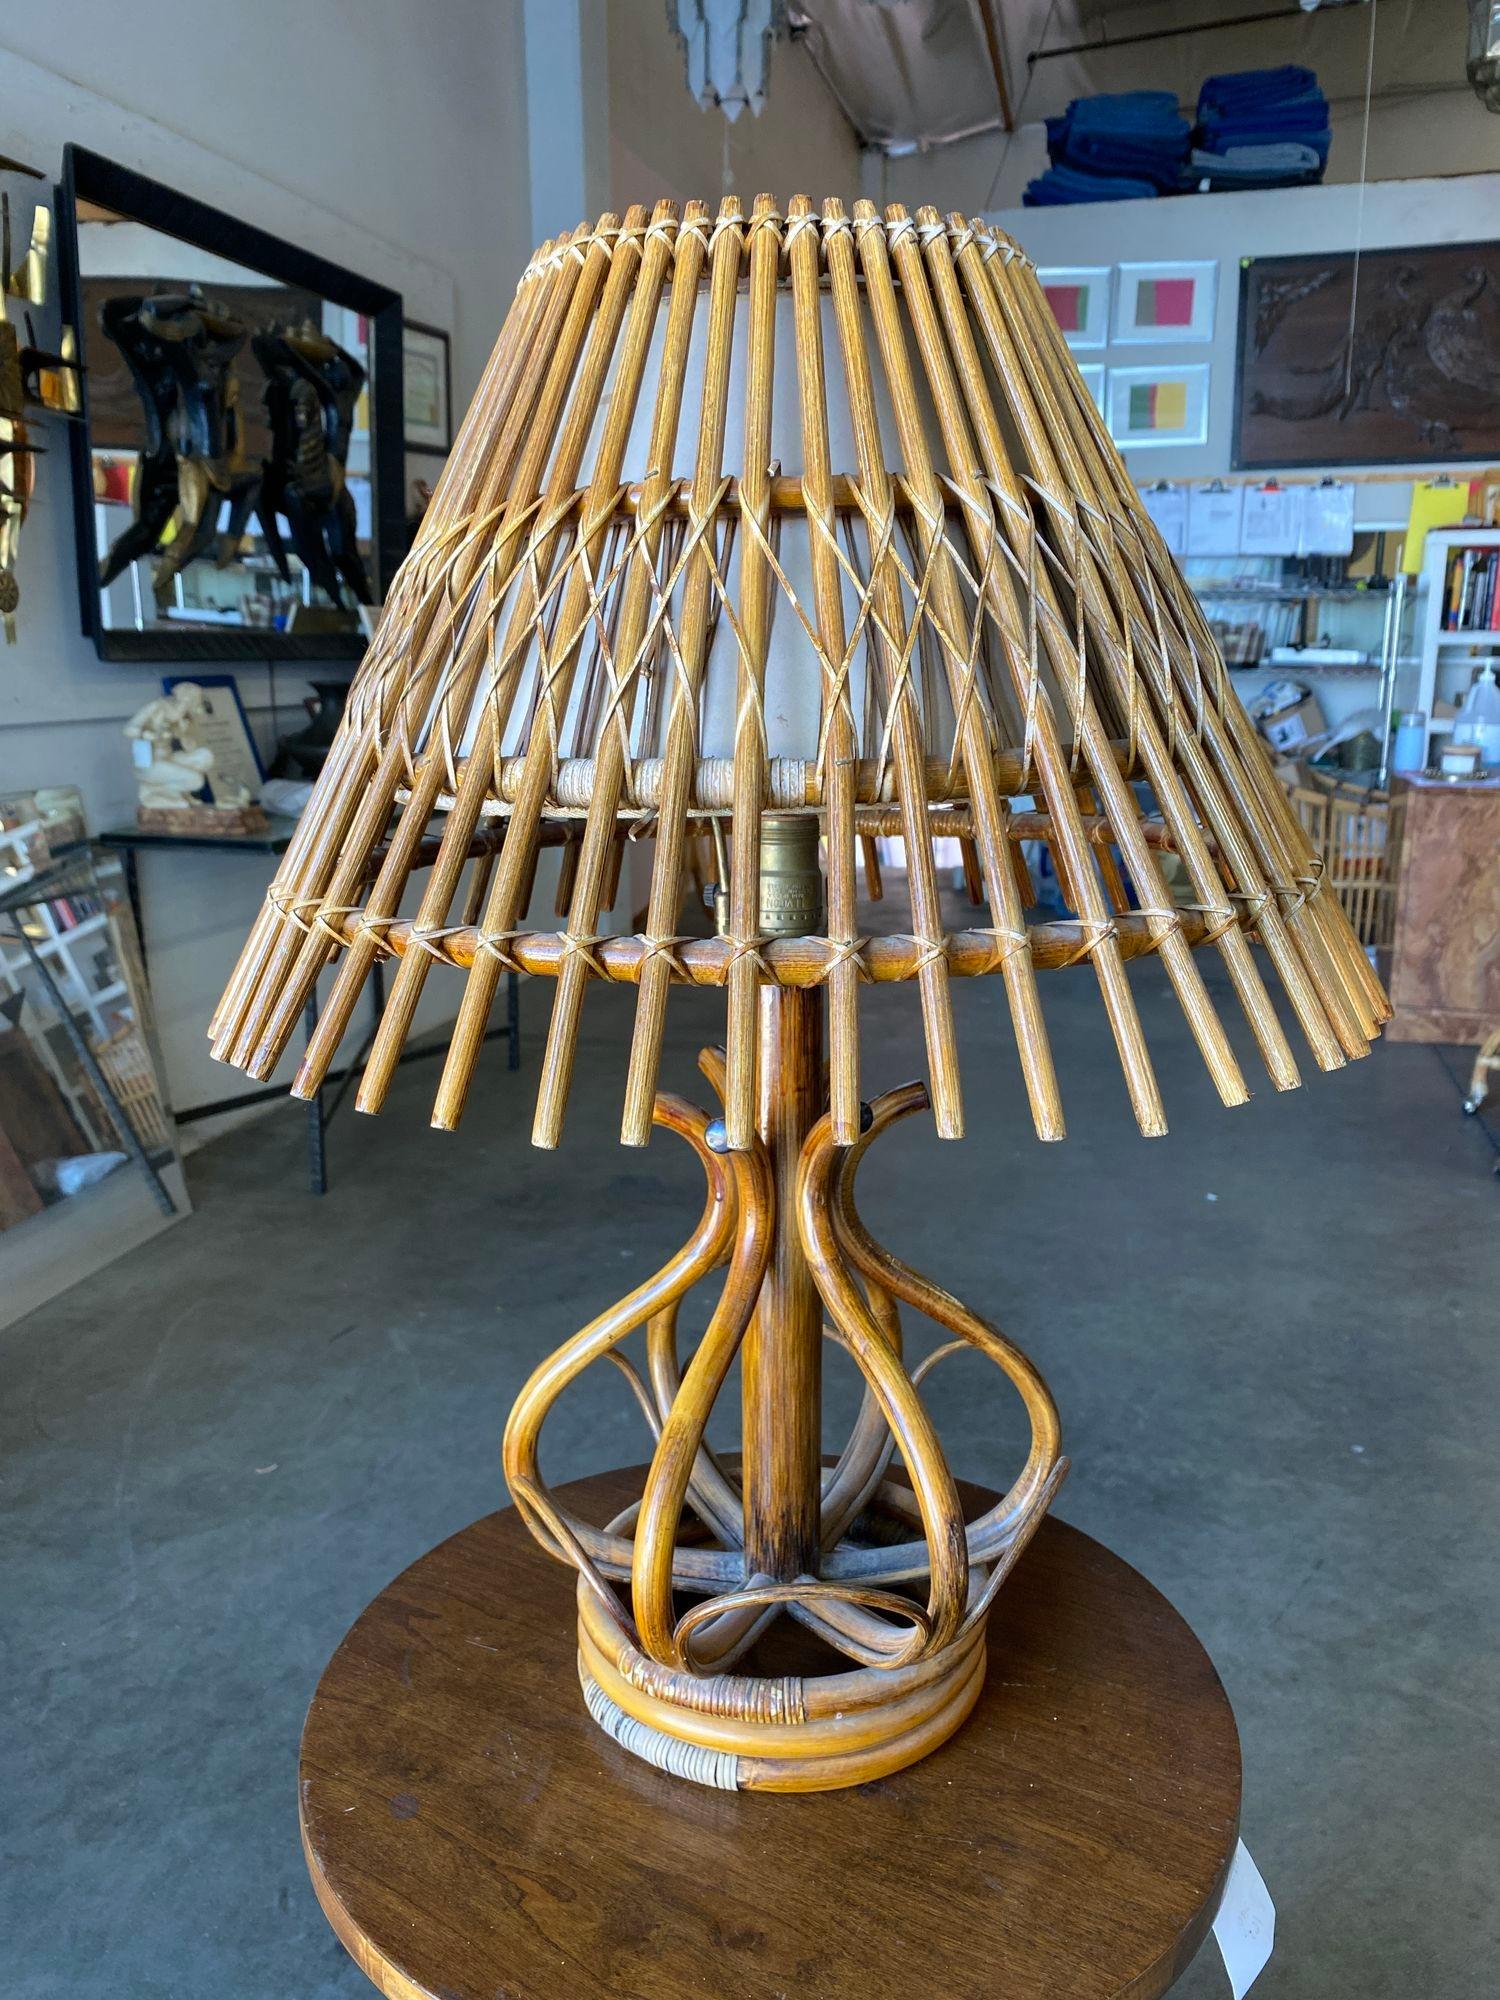 Modernist stacked stick rattan table lamp with outward stick rattan fan shade.

Lamp: 20